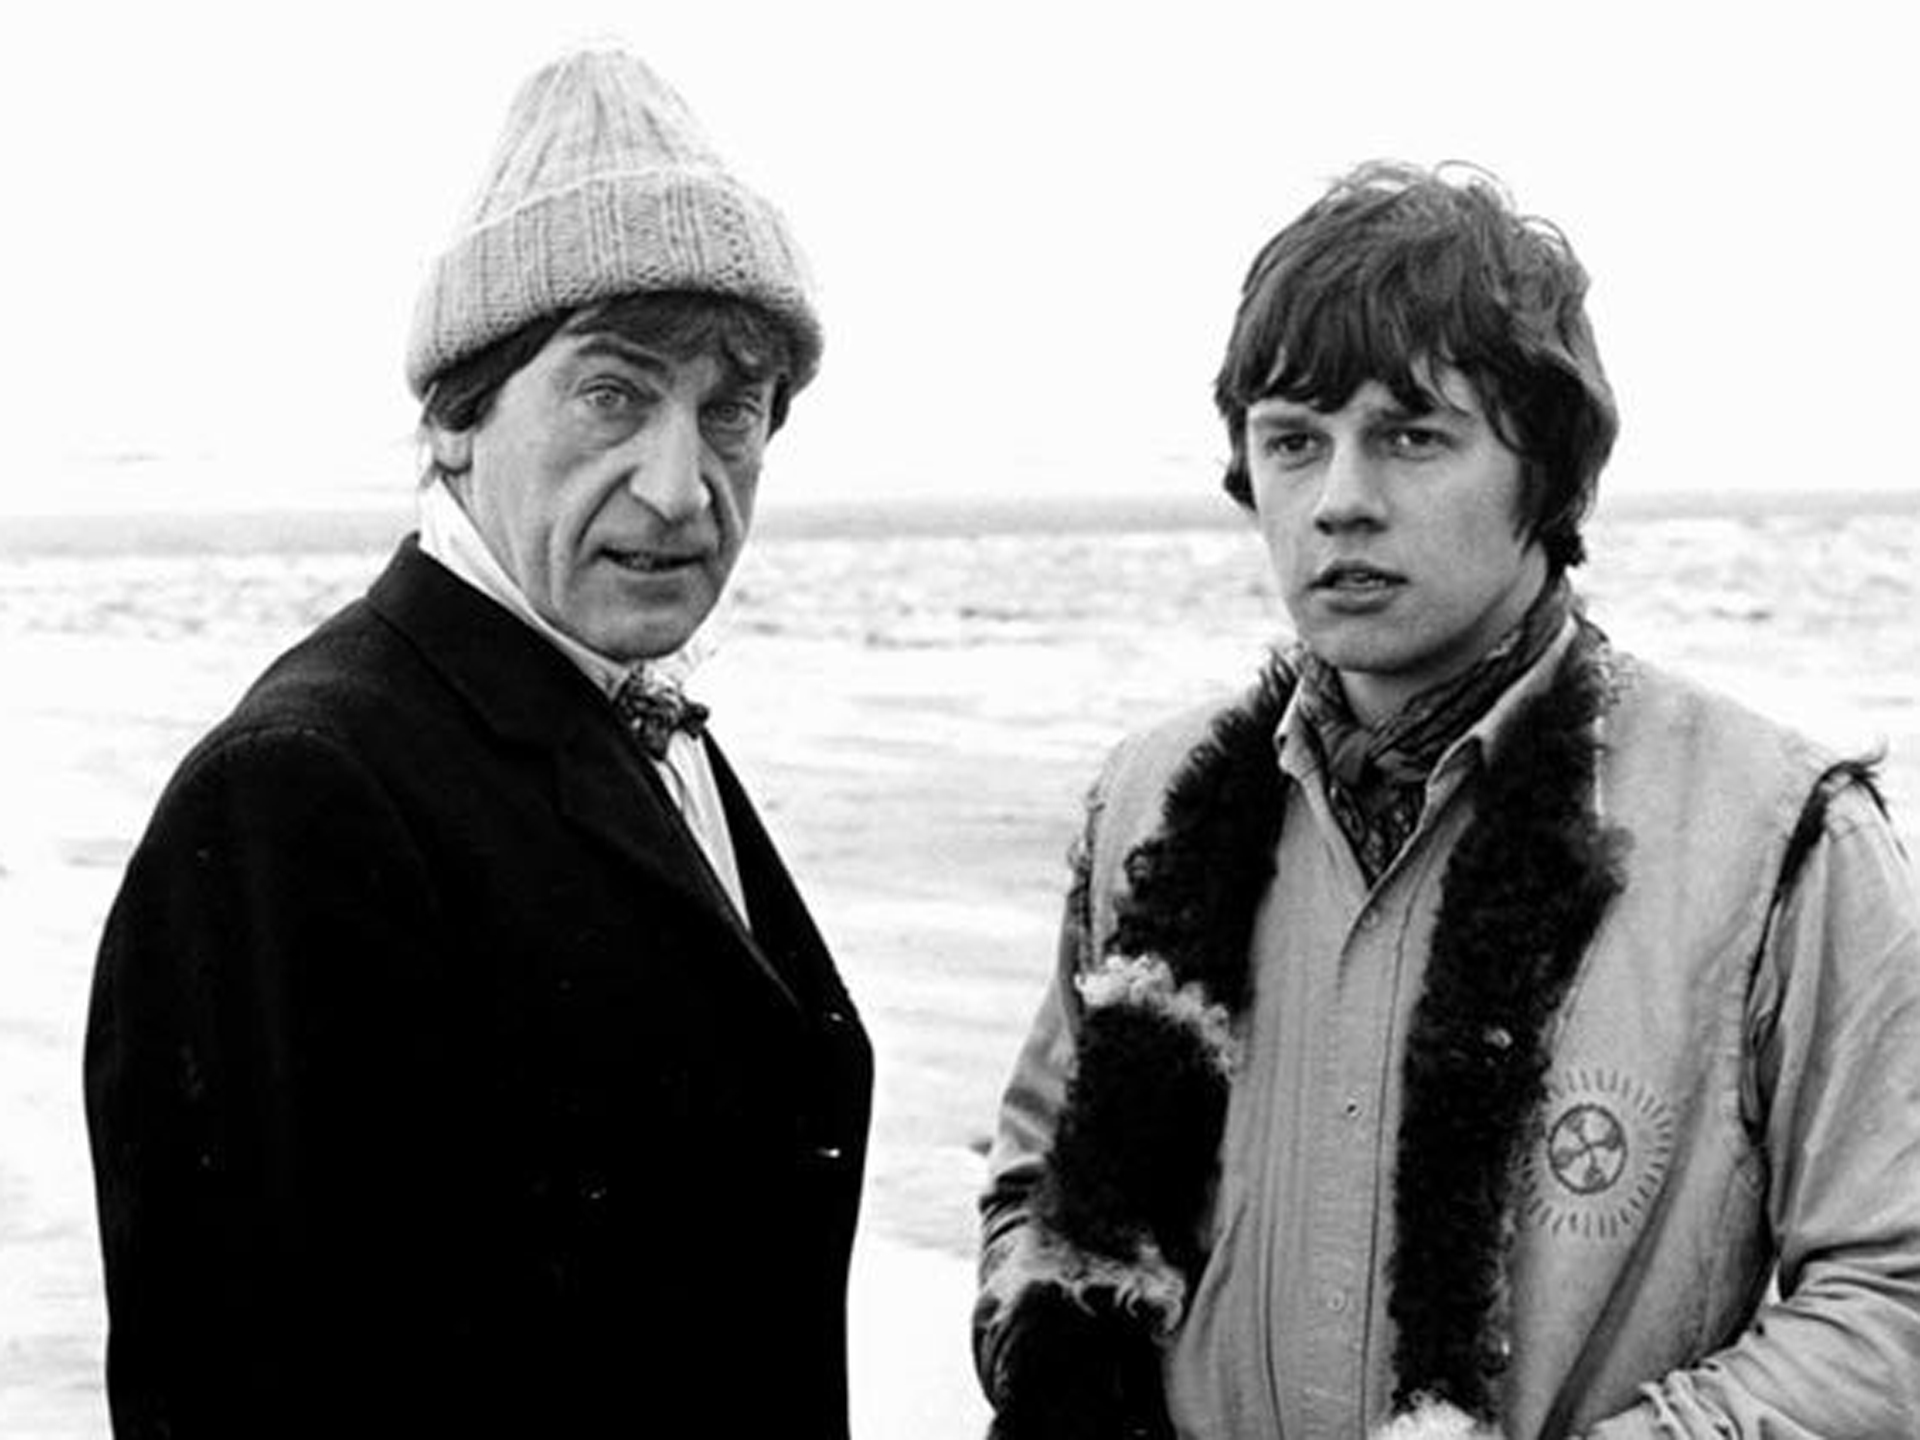 Doctor Who's Frazer Hines on Jamie McCrimmon, Big Finish and more | SciFiNow - The ...1920 x 1440